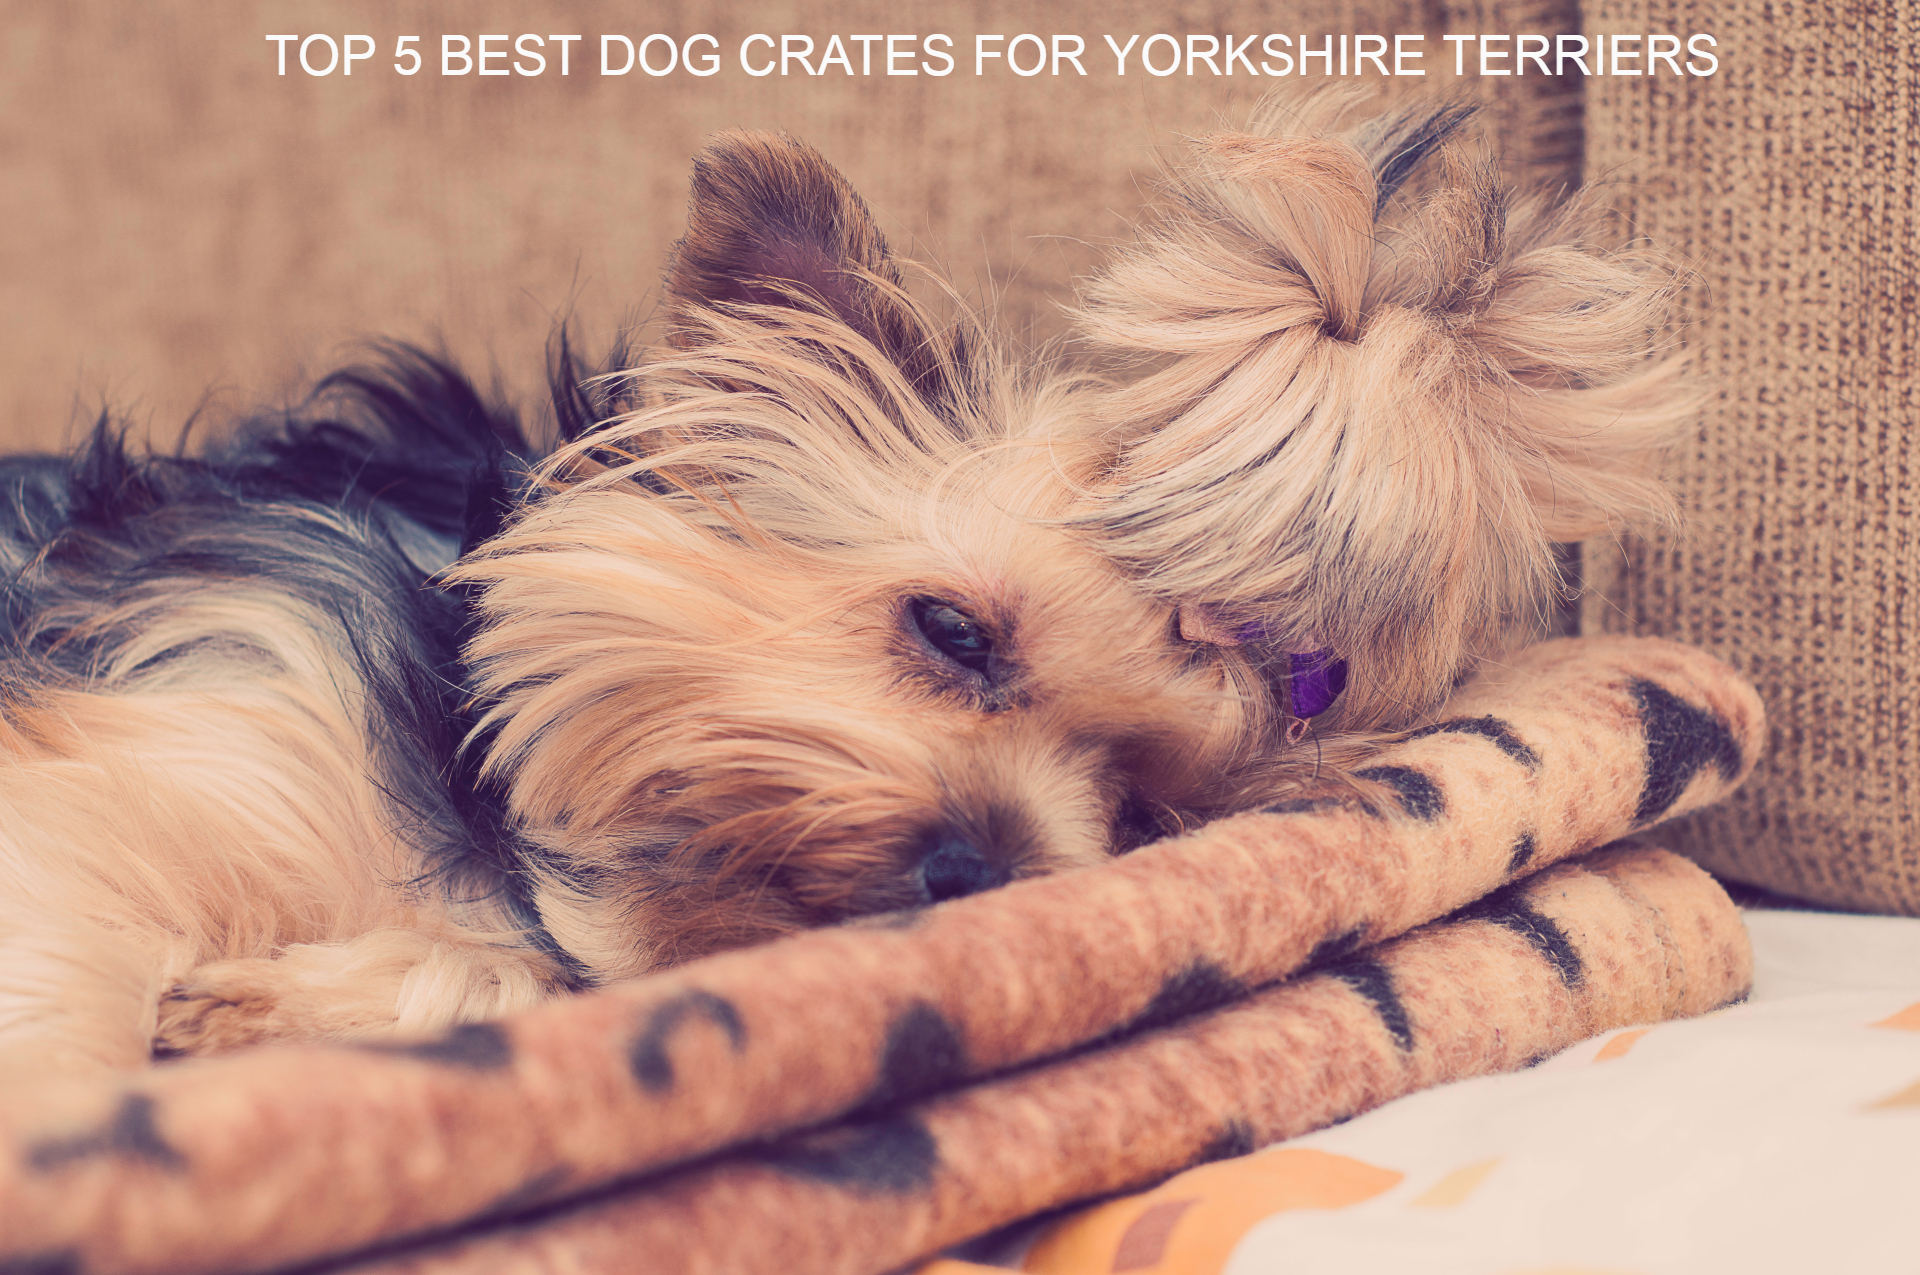 Best Dog Crates For Yorkshire Terriers